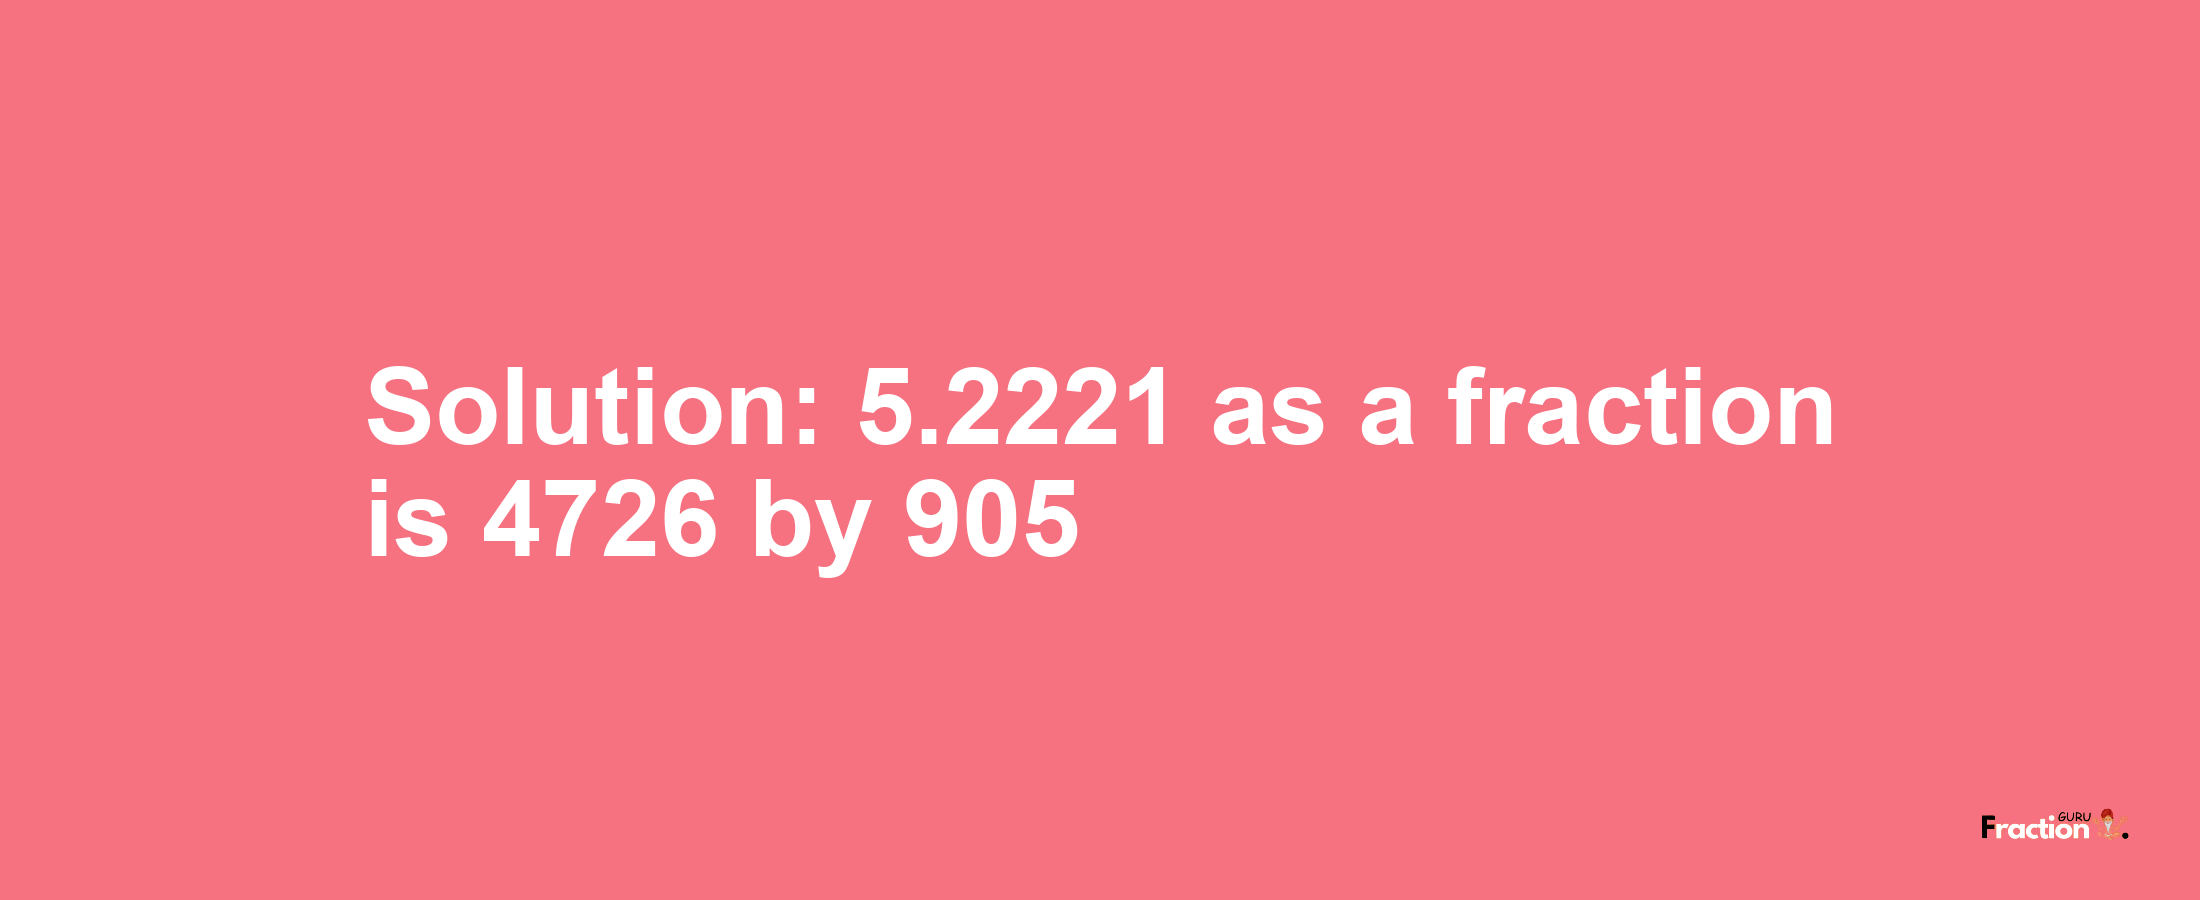 Solution:5.2221 as a fraction is 4726/905